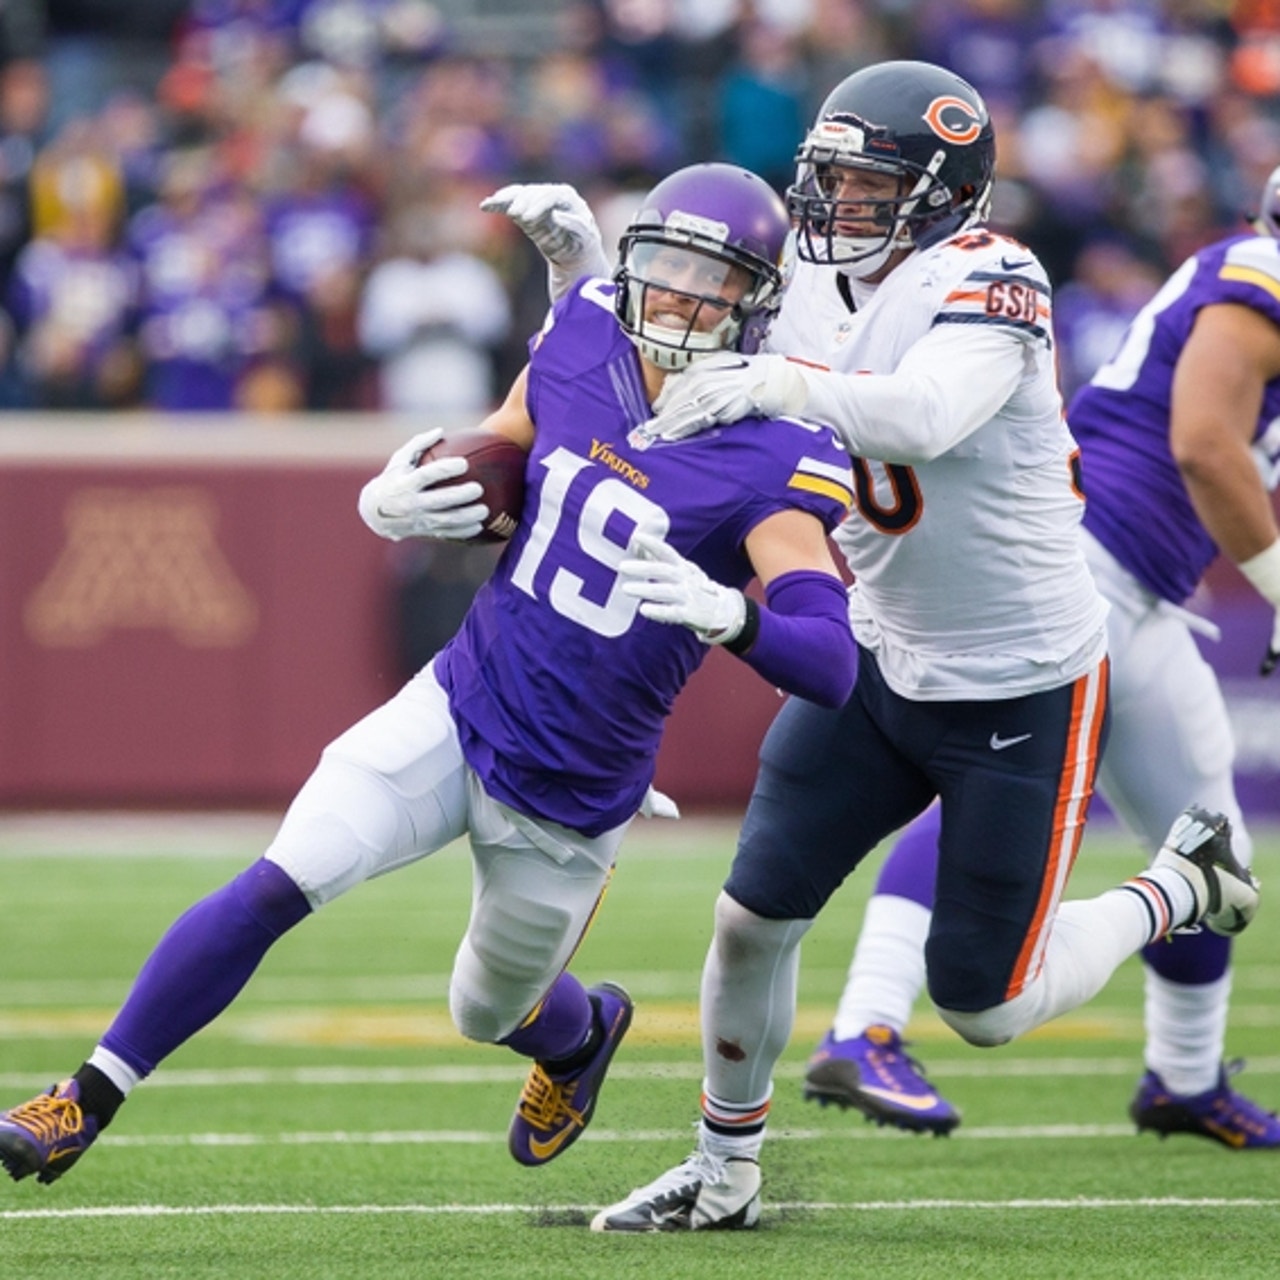 Minnesota Vikings vs Chicago Bears: How to watch live or stream online